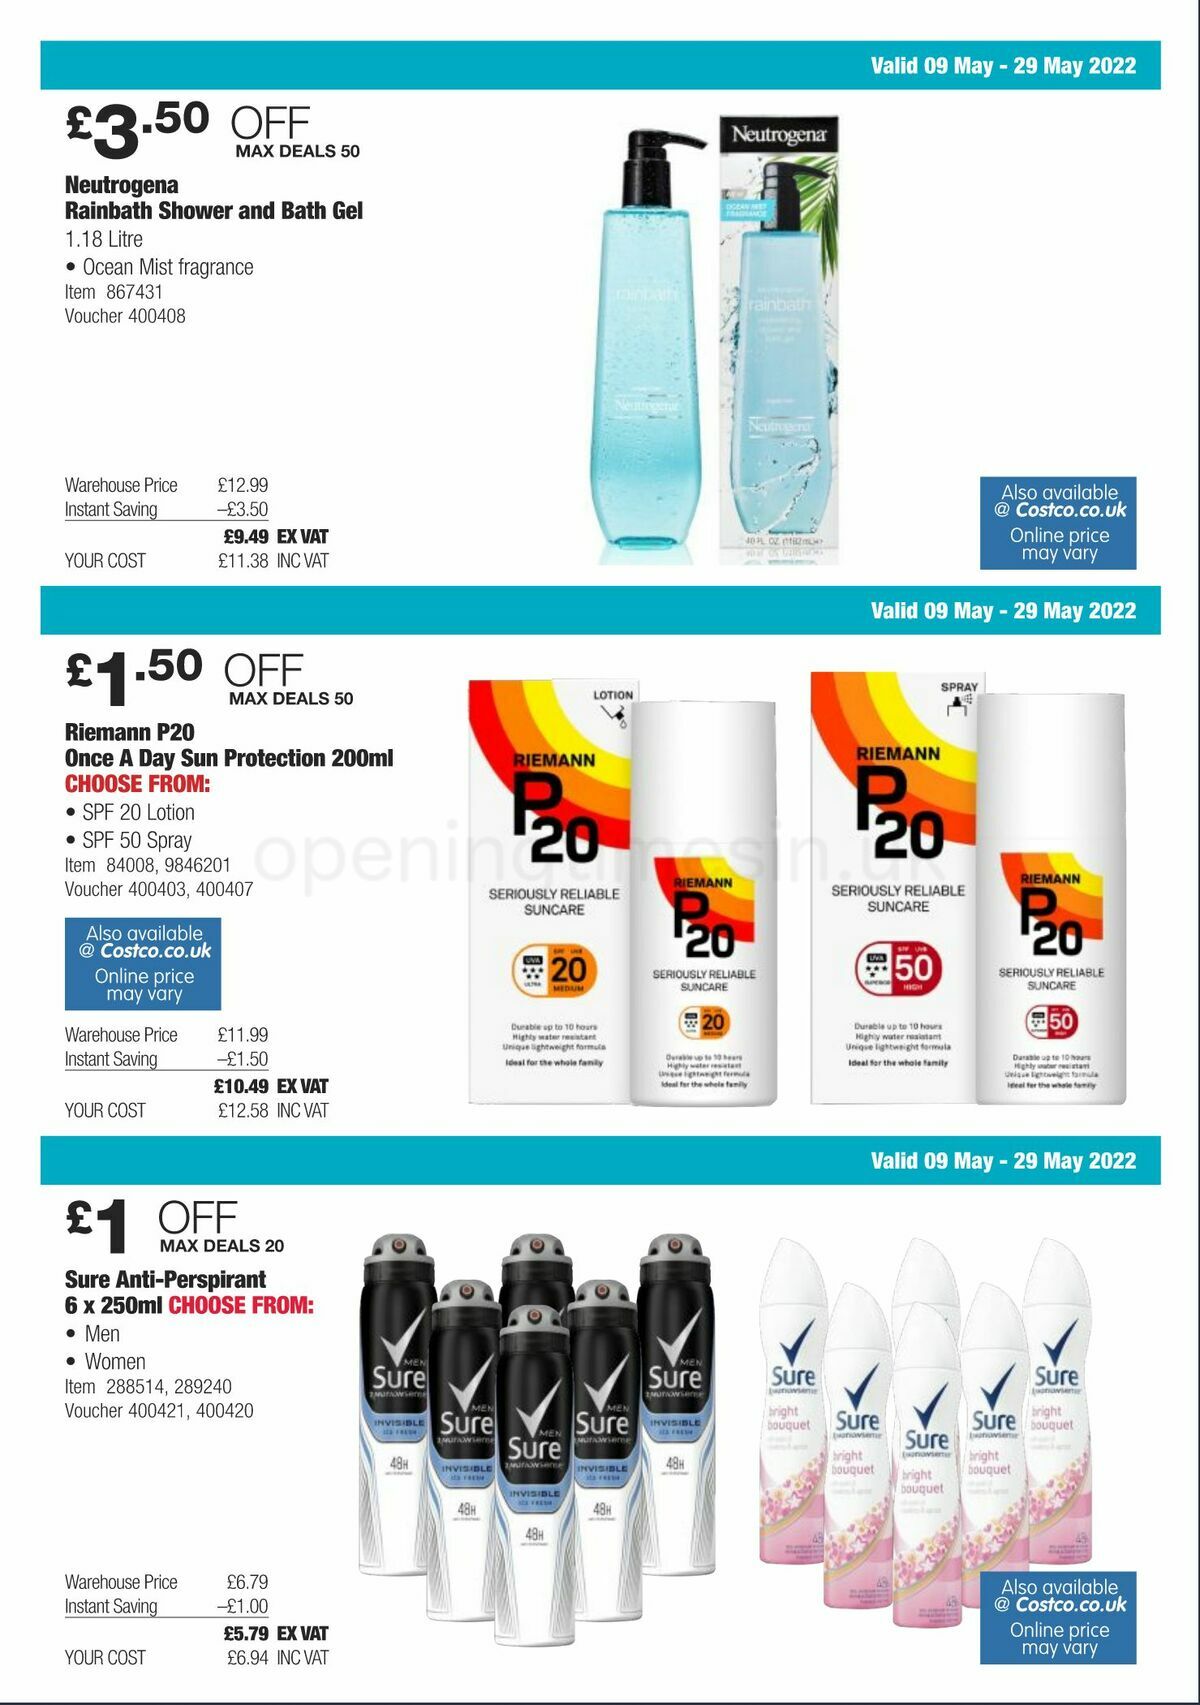 Costco Scotland & Wales Offers from 9 May